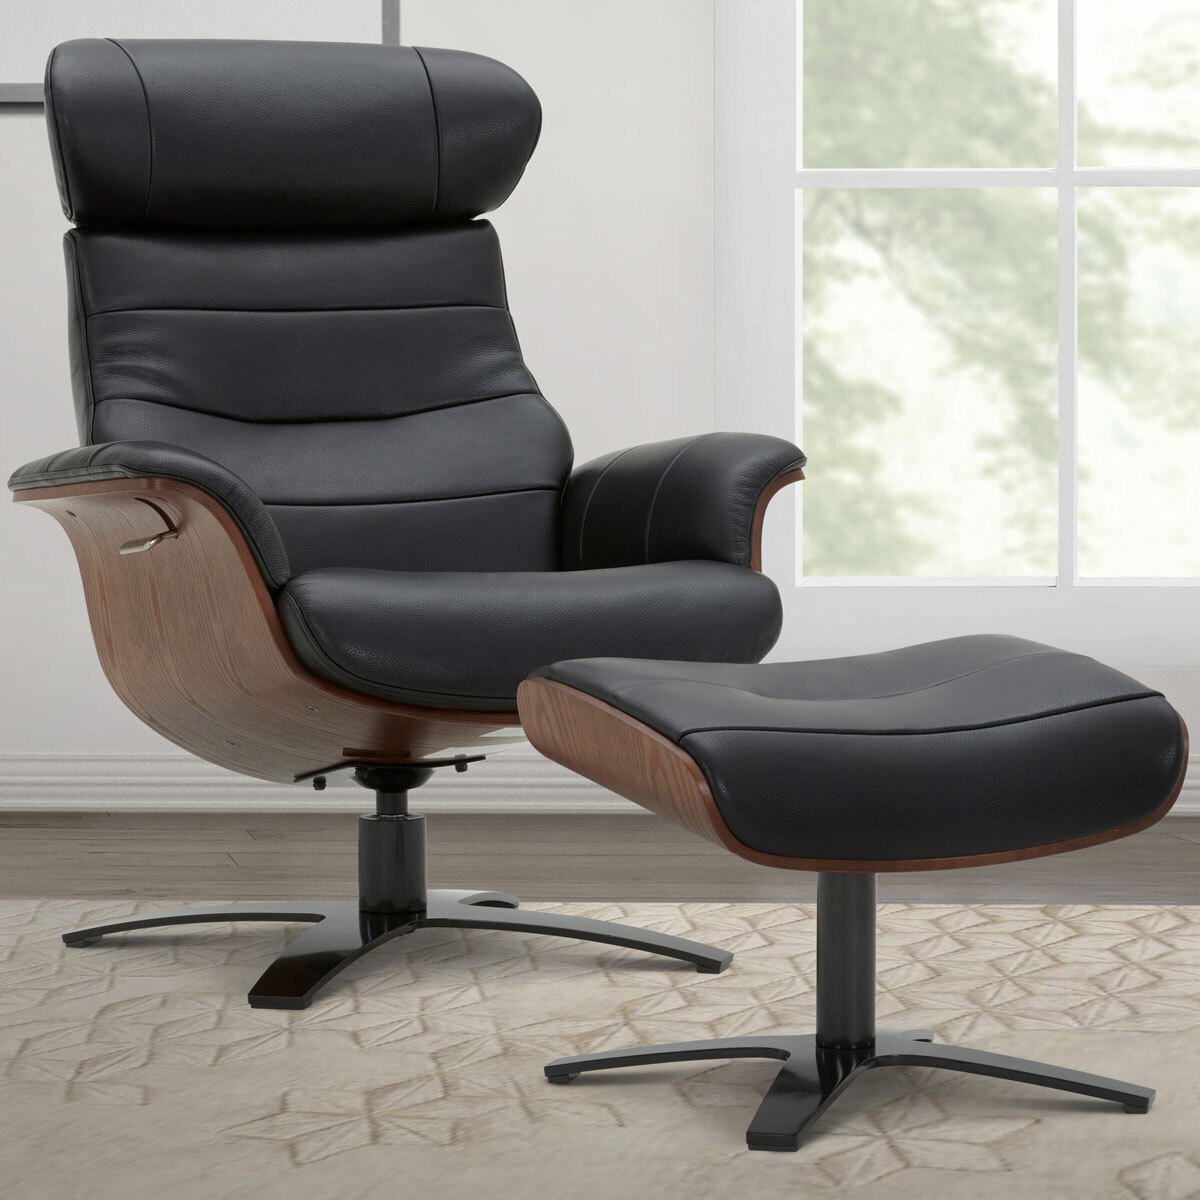 Karma Black Leather Swivel Chair, Black Leather Chair With Ottoman